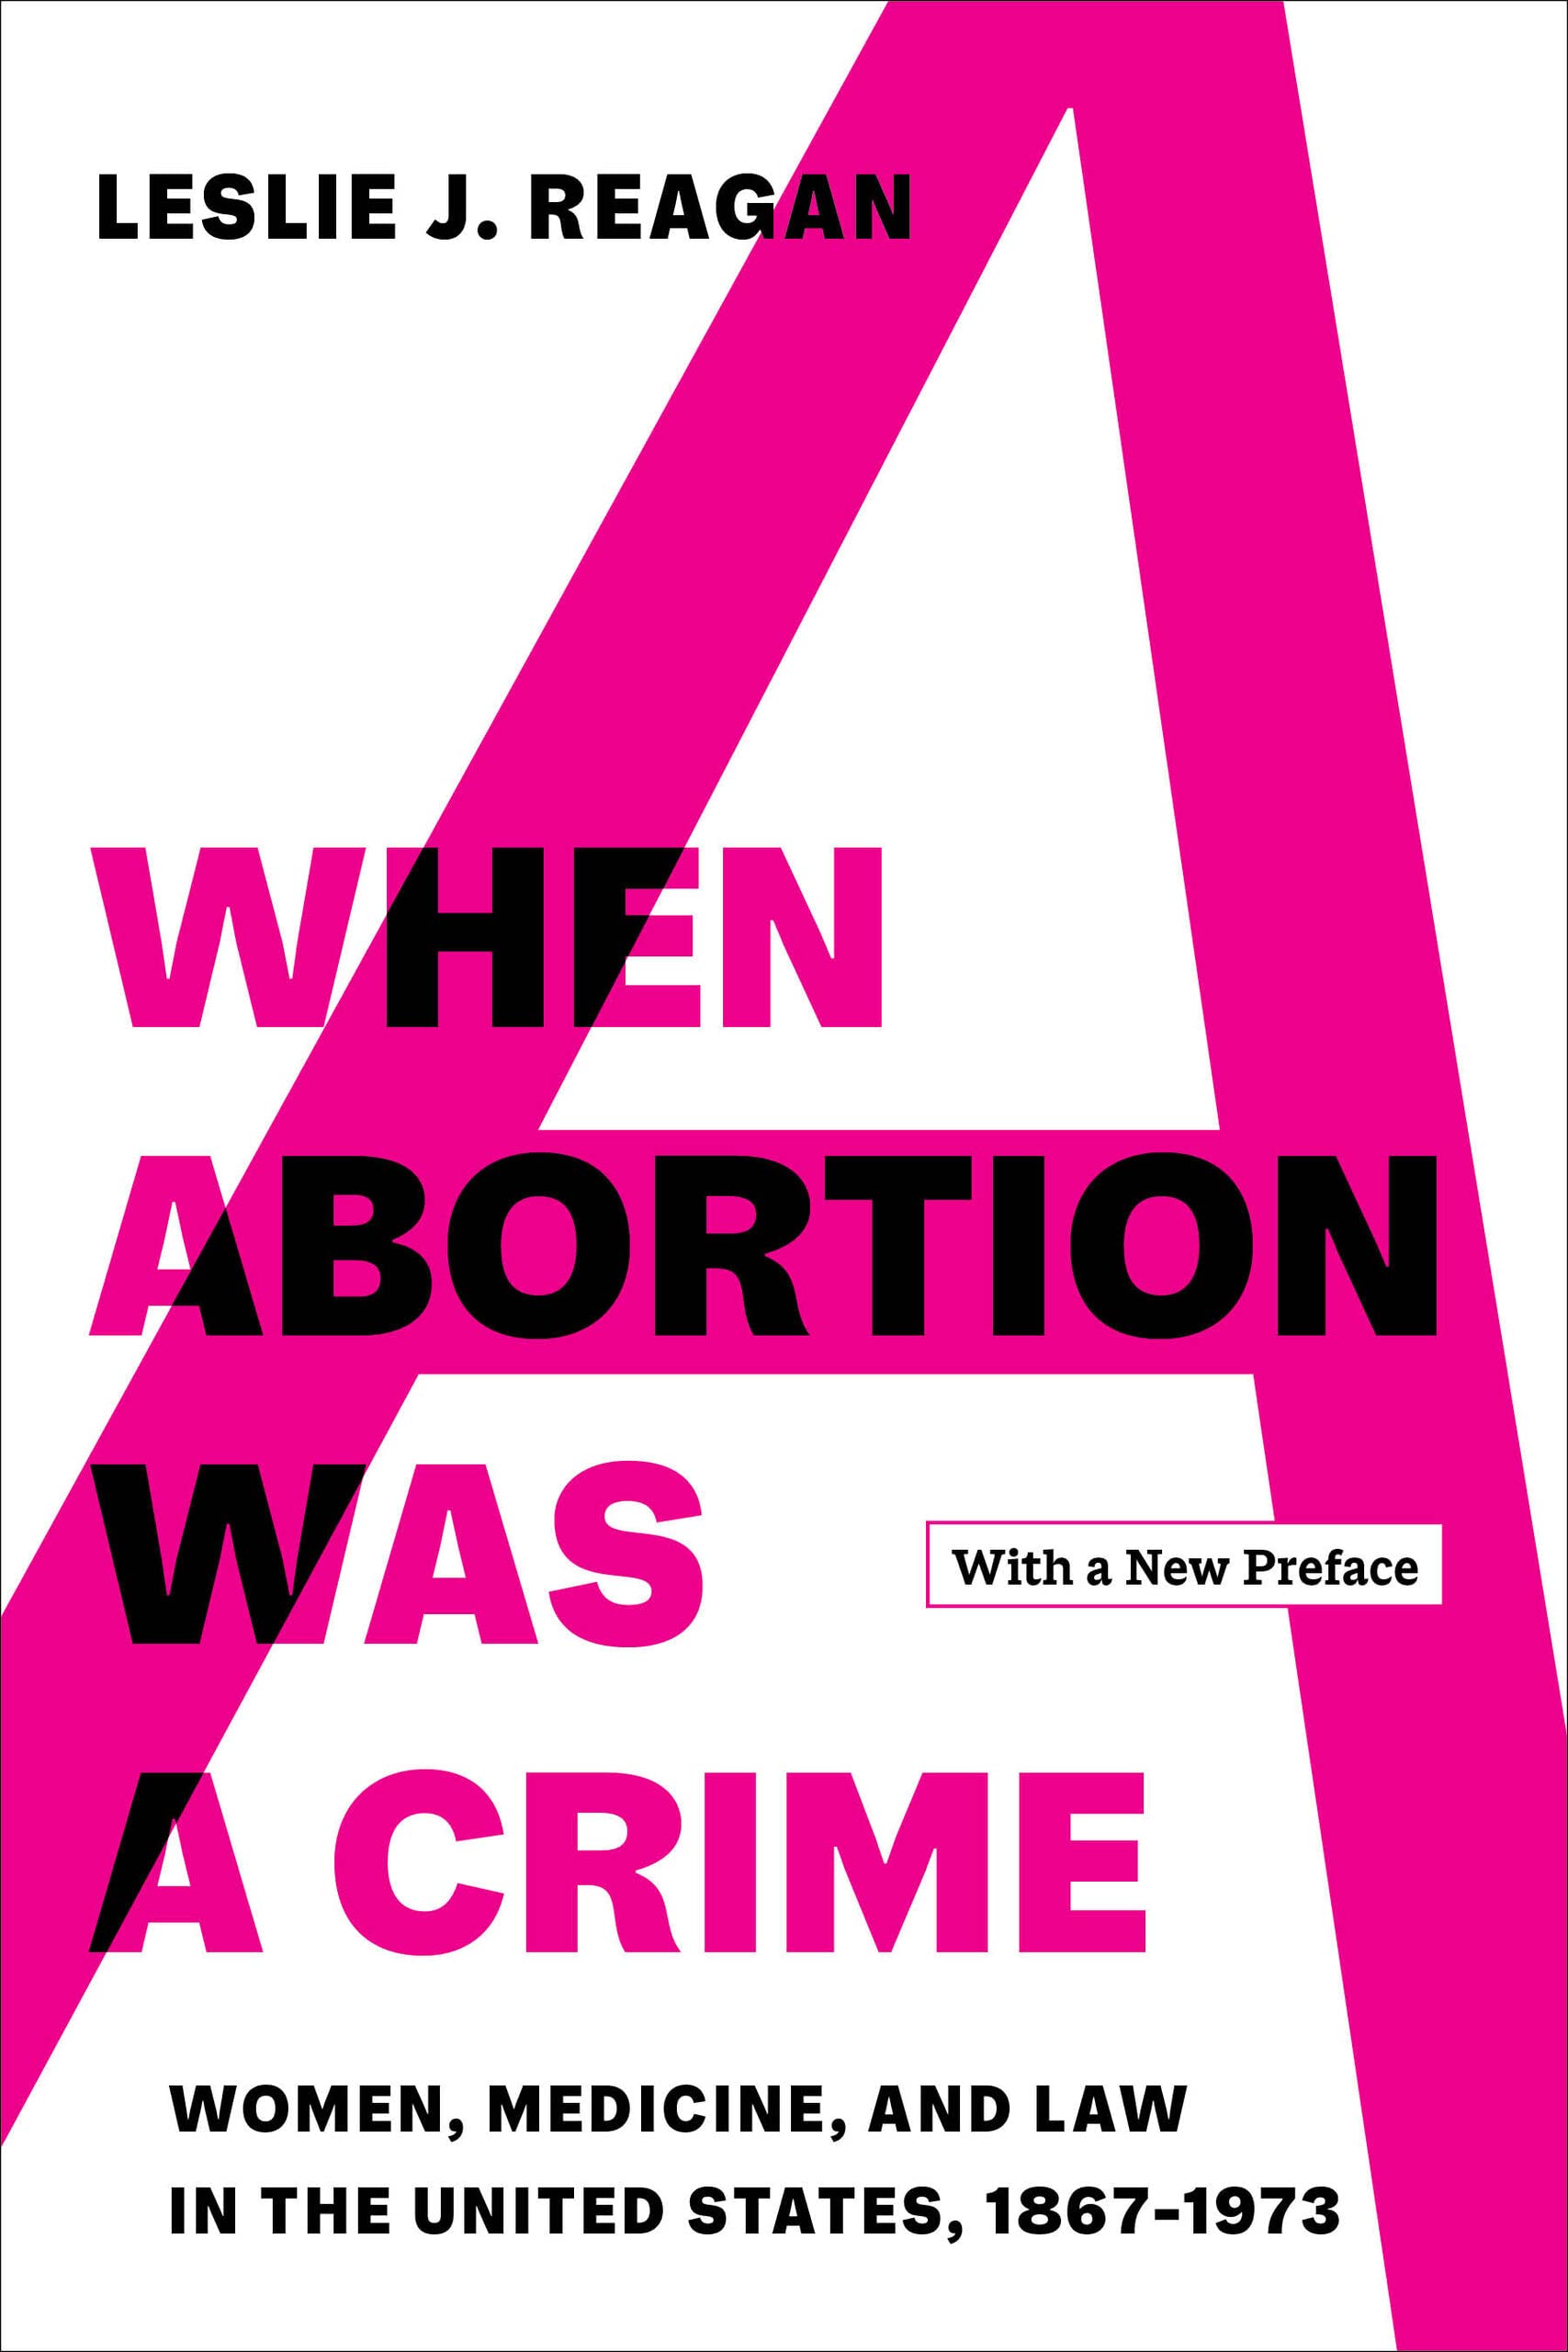 When abortion was a crime